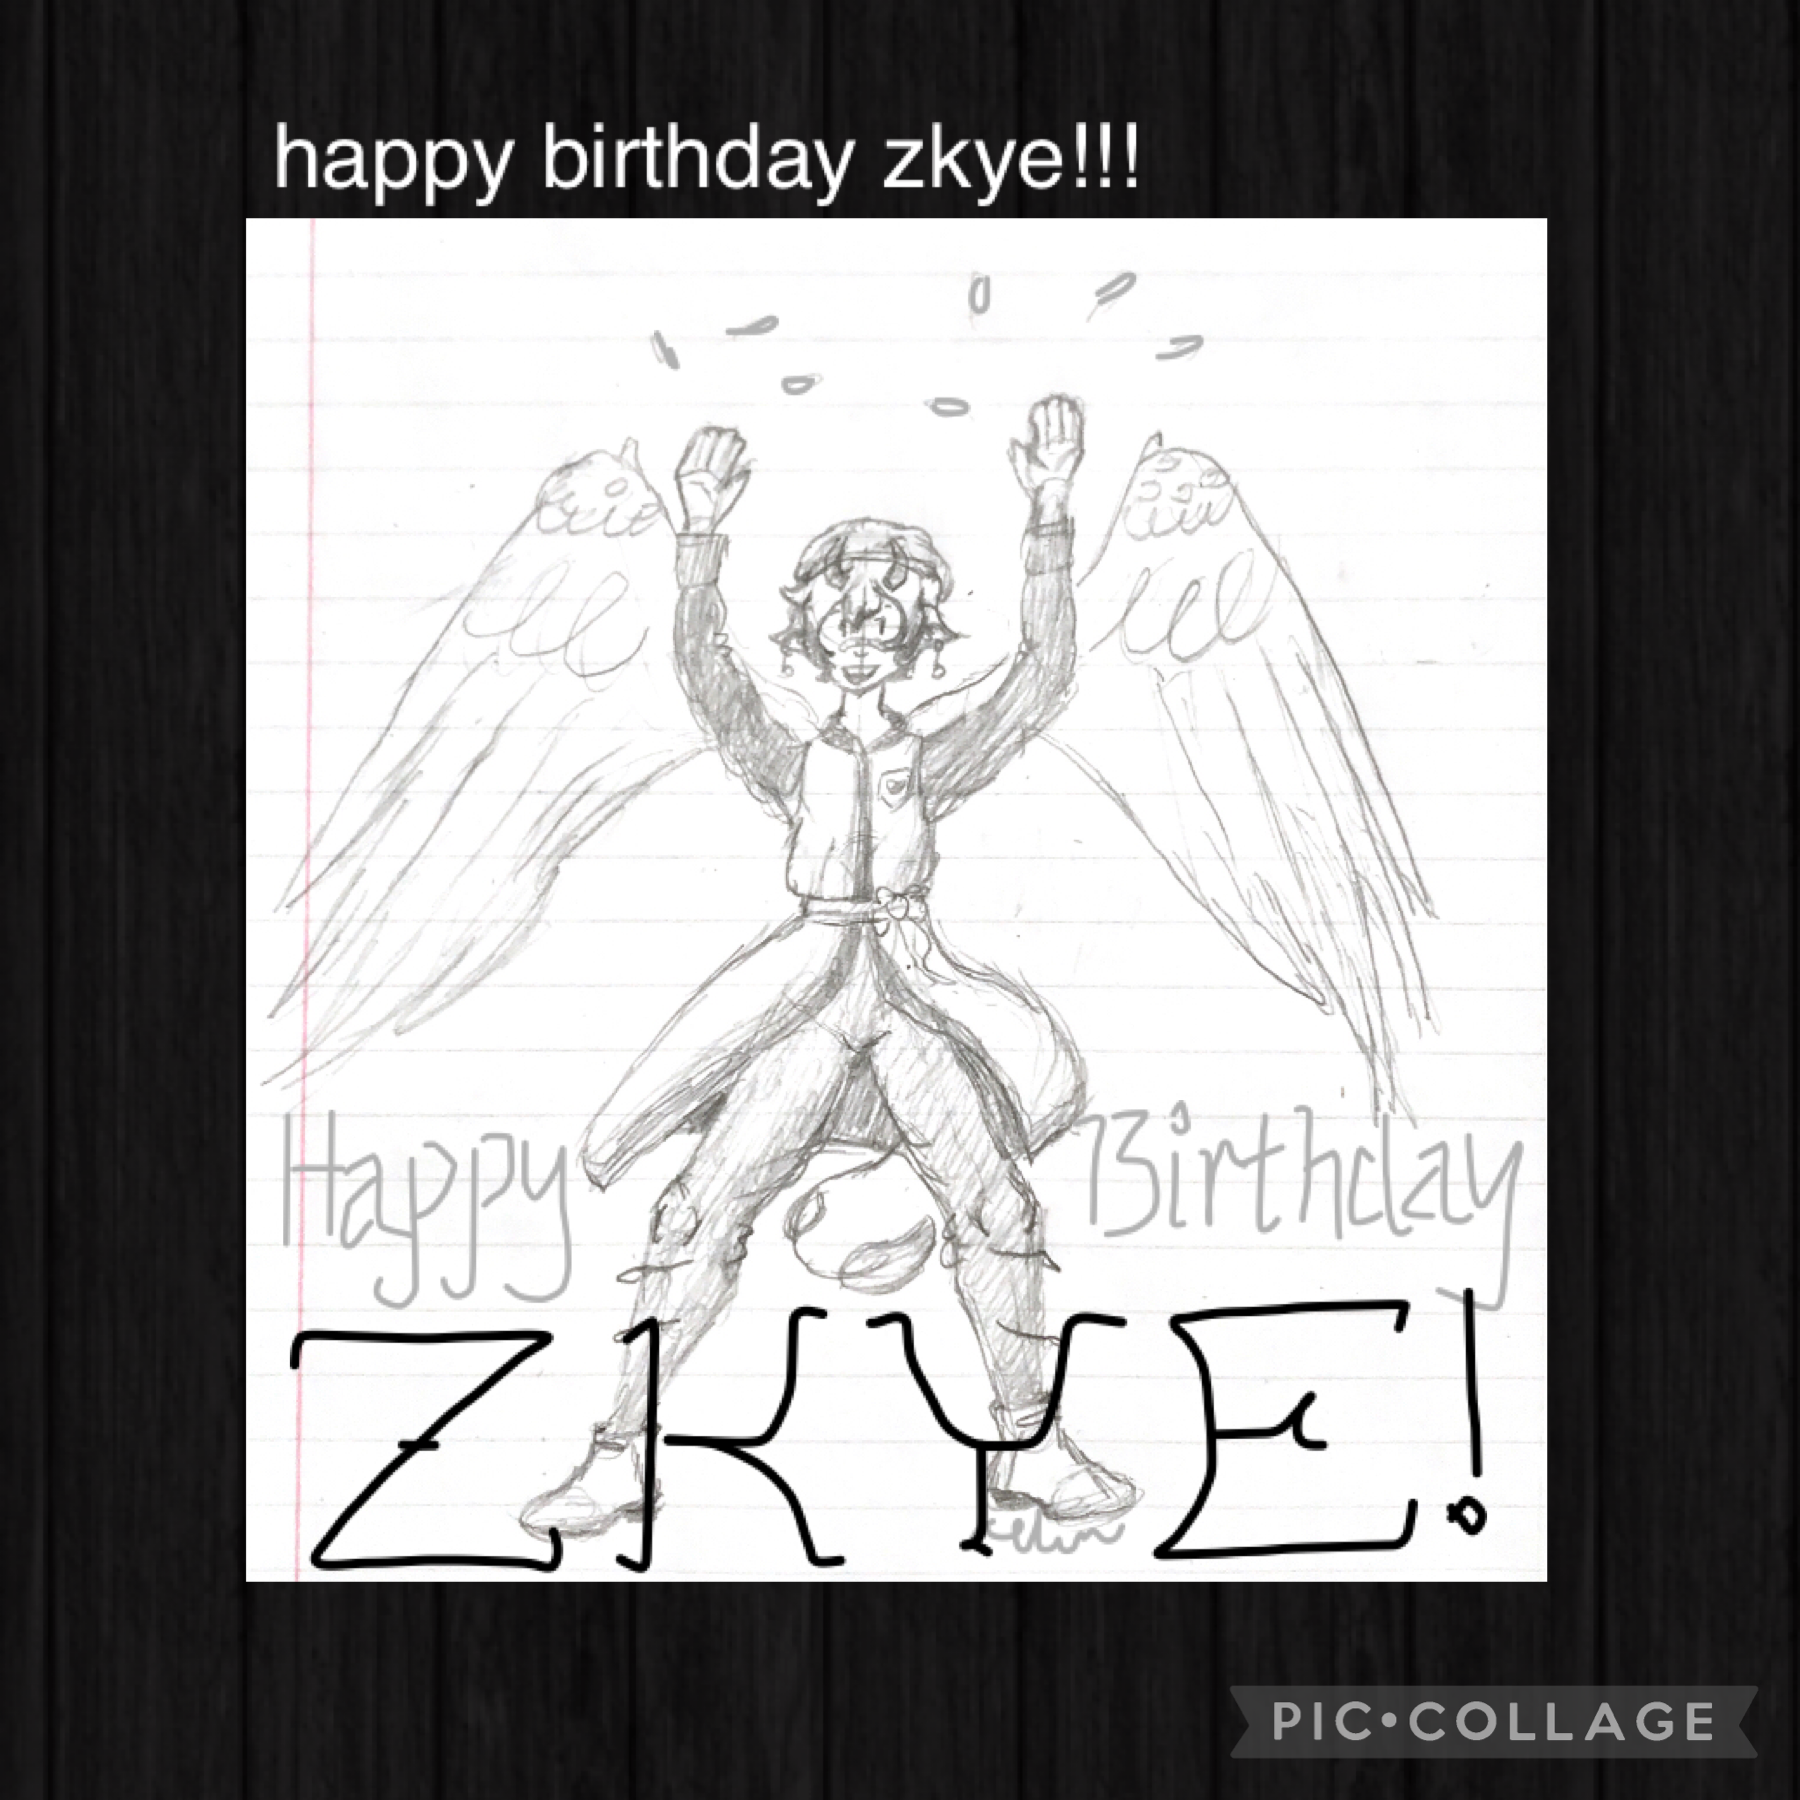 happy birth @zzysto!!! (tap)

ik this is a lil rushed but i wanted to get it done before the afternoon cuz i’m rlly busy tonight. have a good birthday zkye, i hope i did kidd’s design justice lol